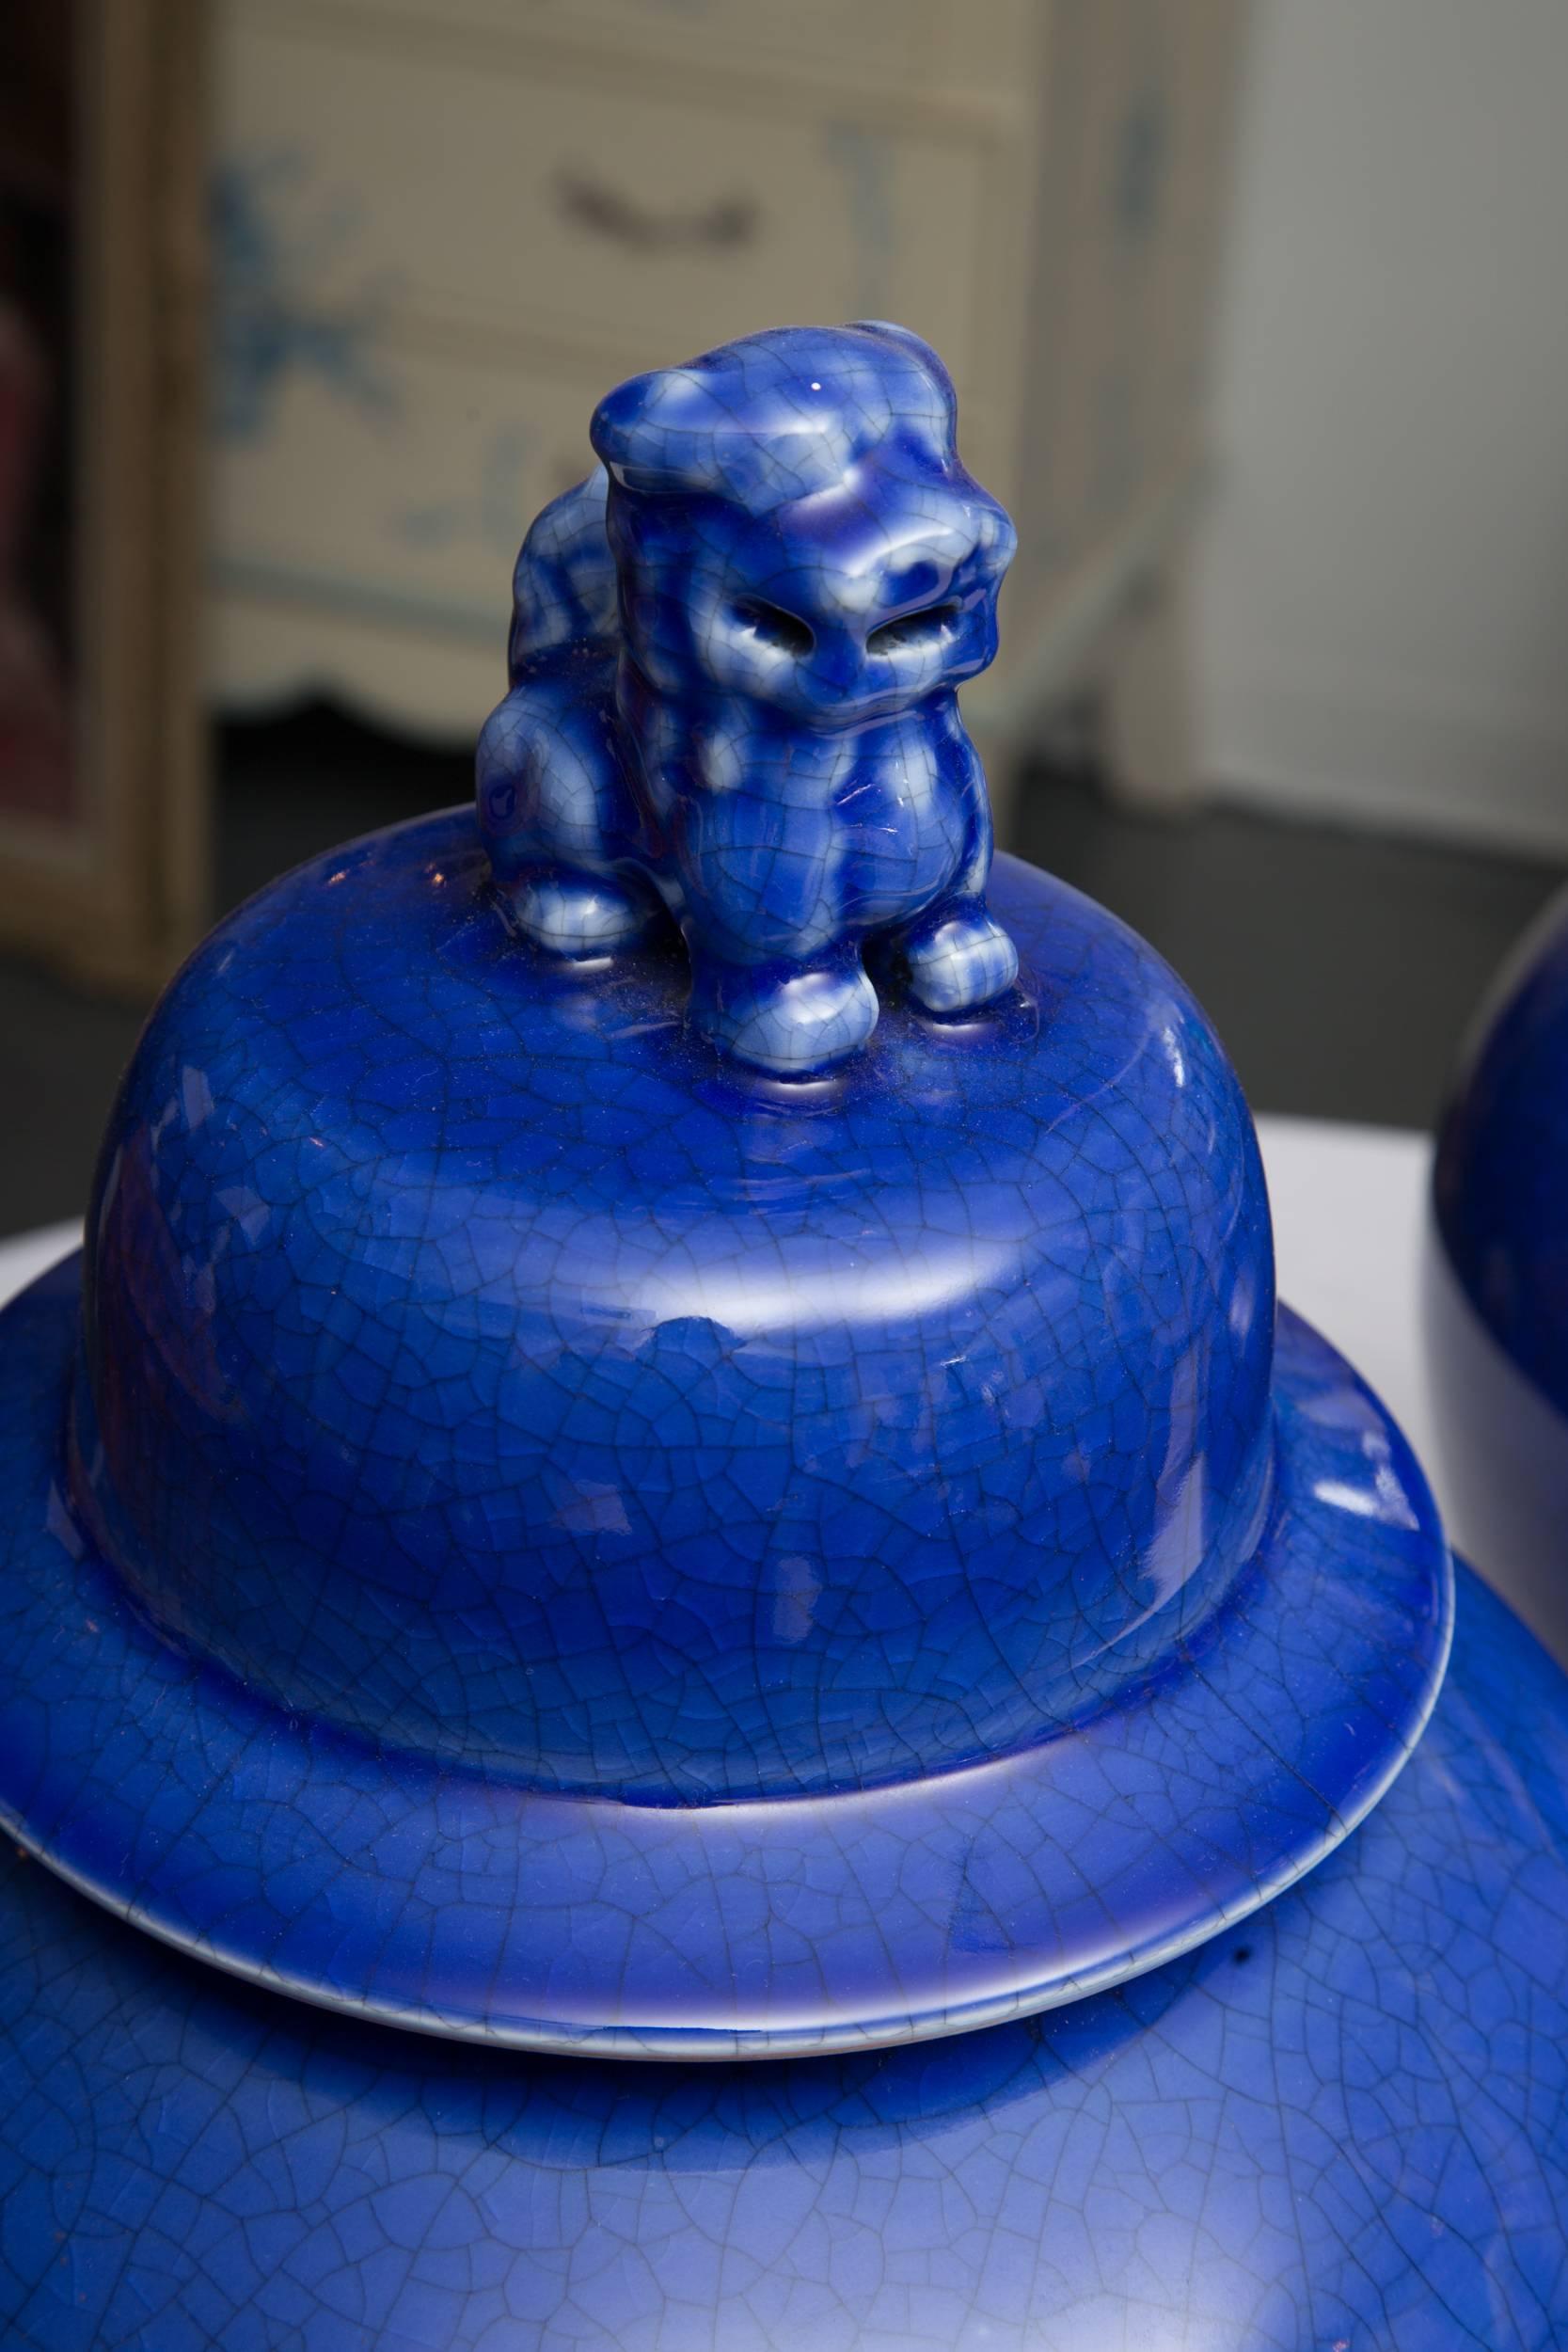 The color of these decorative urns is absolutely spectacular. The royal blue 'pops' with a crackled finish and a Foo Dog decoration on top of the lid. The hand made urns are Chinese, hand painted and fired. 20th Century
